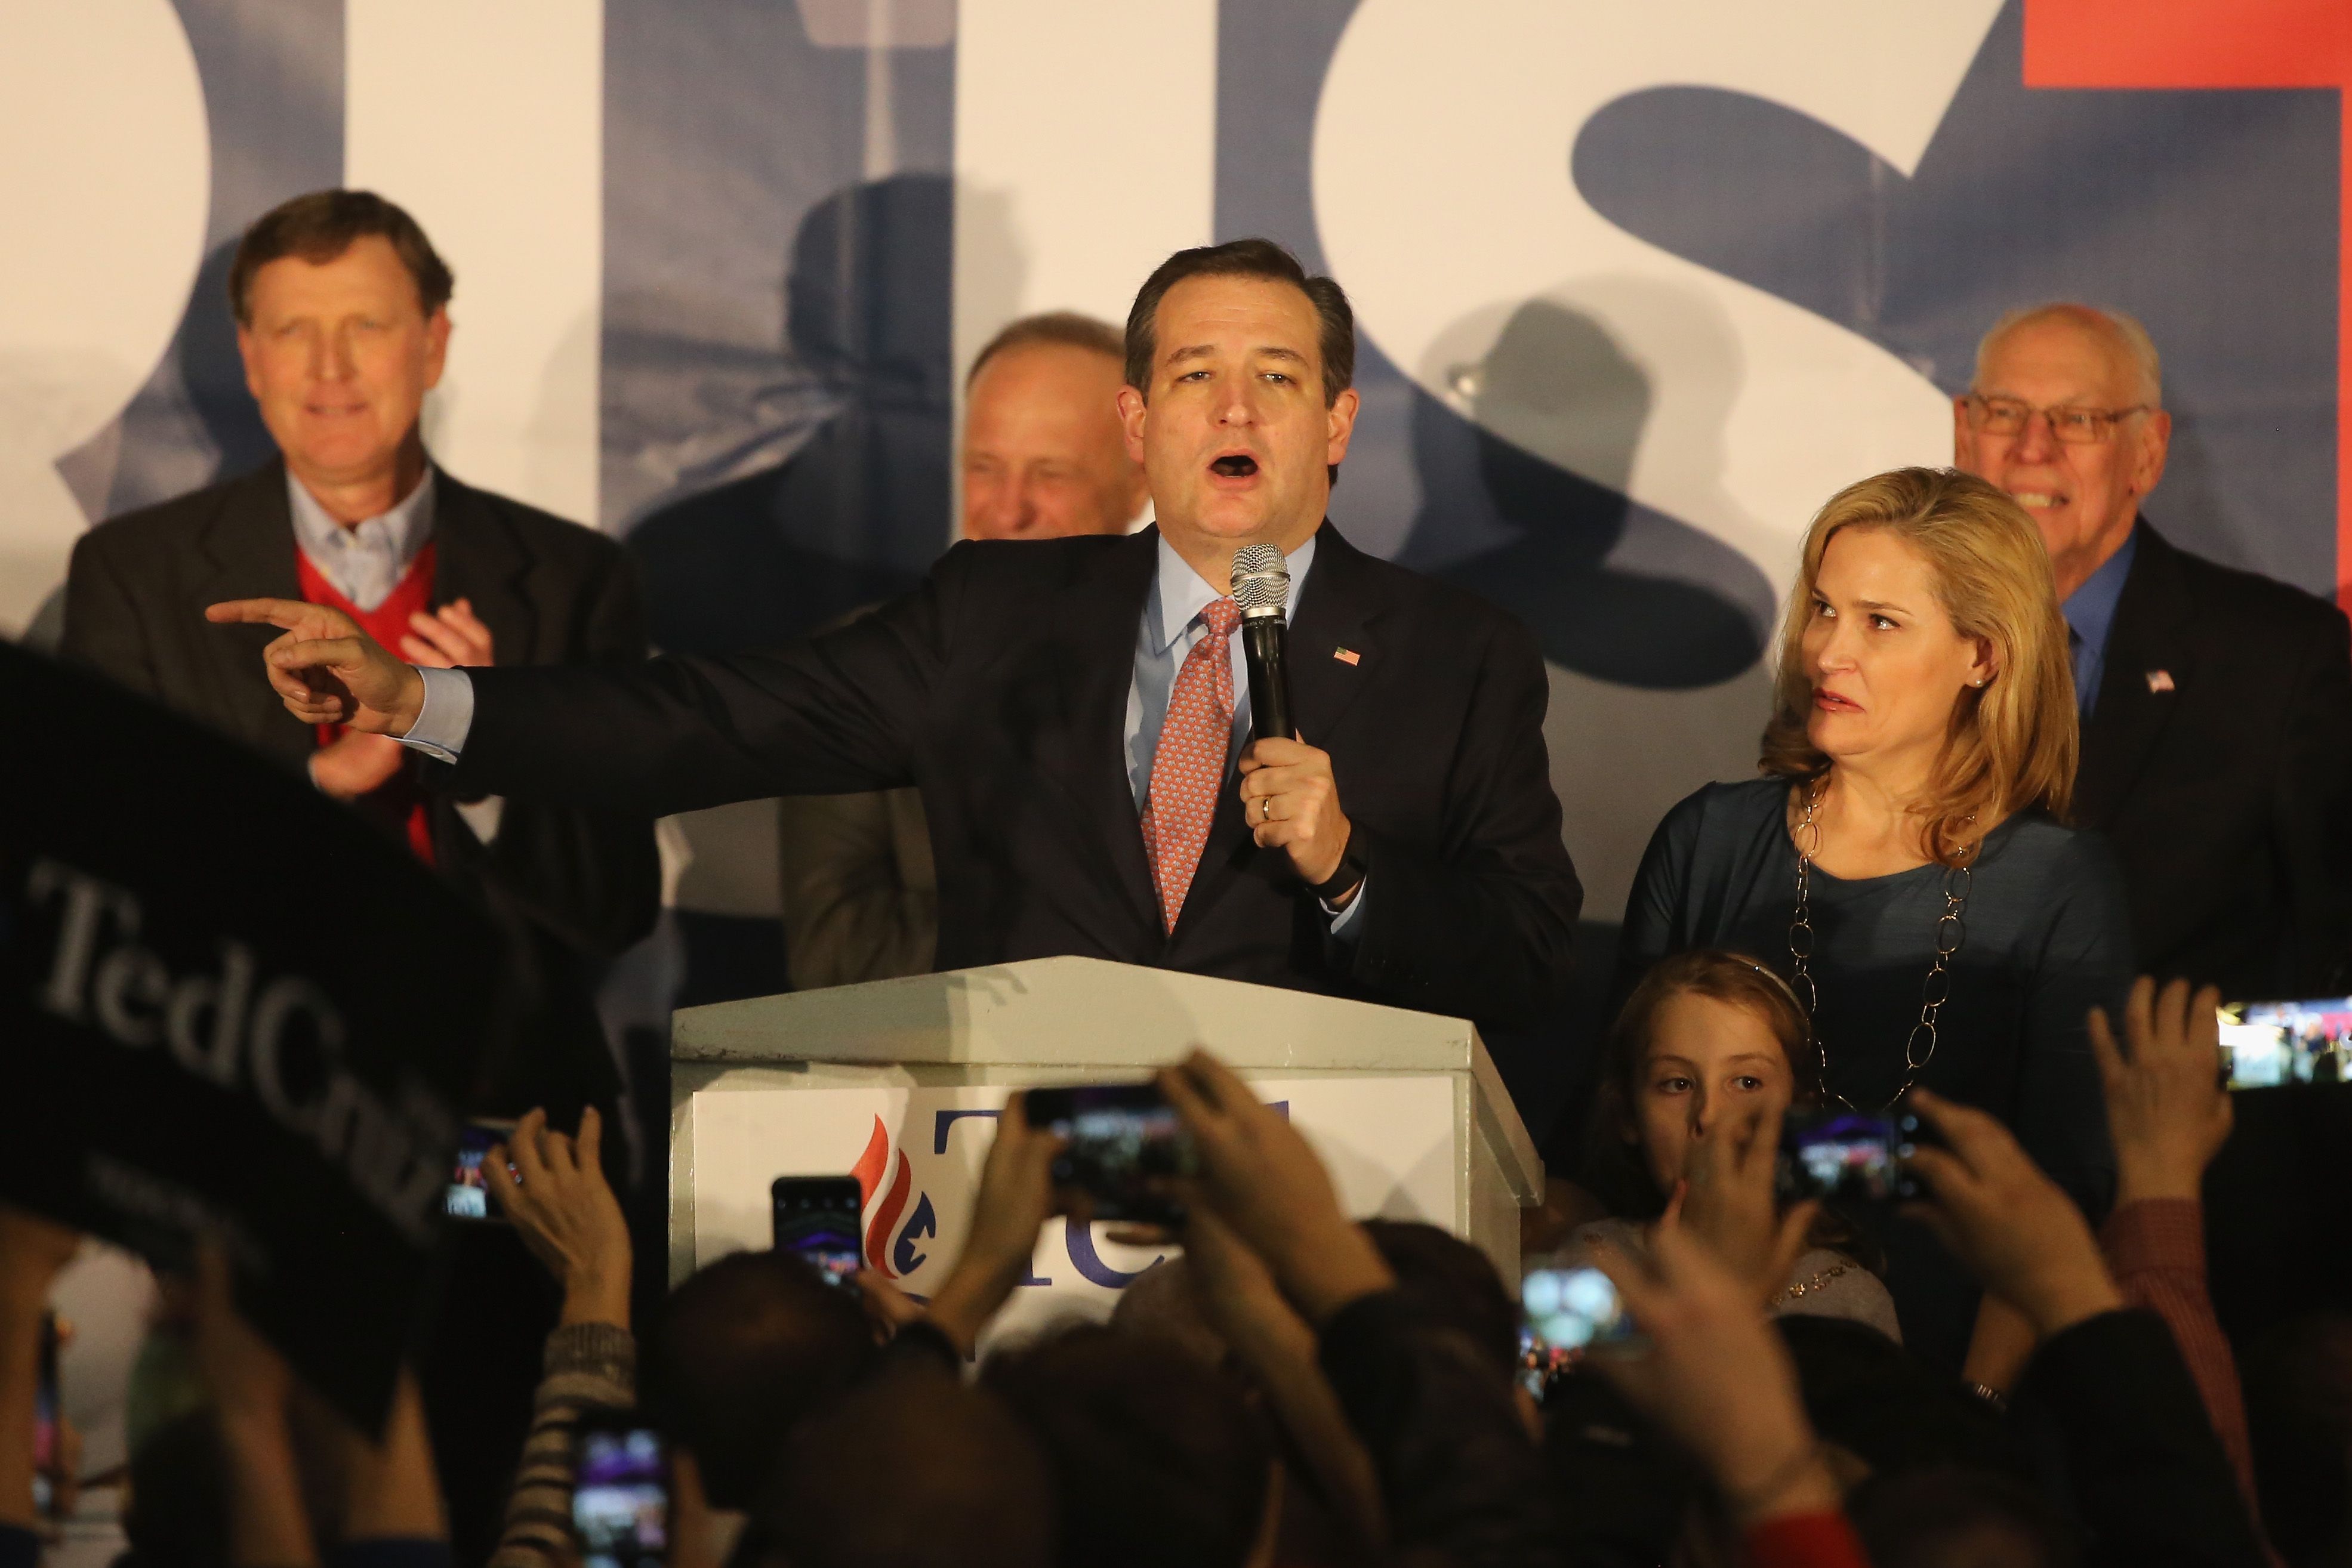 Ted Cruz holds a microphone and points while giving a speech